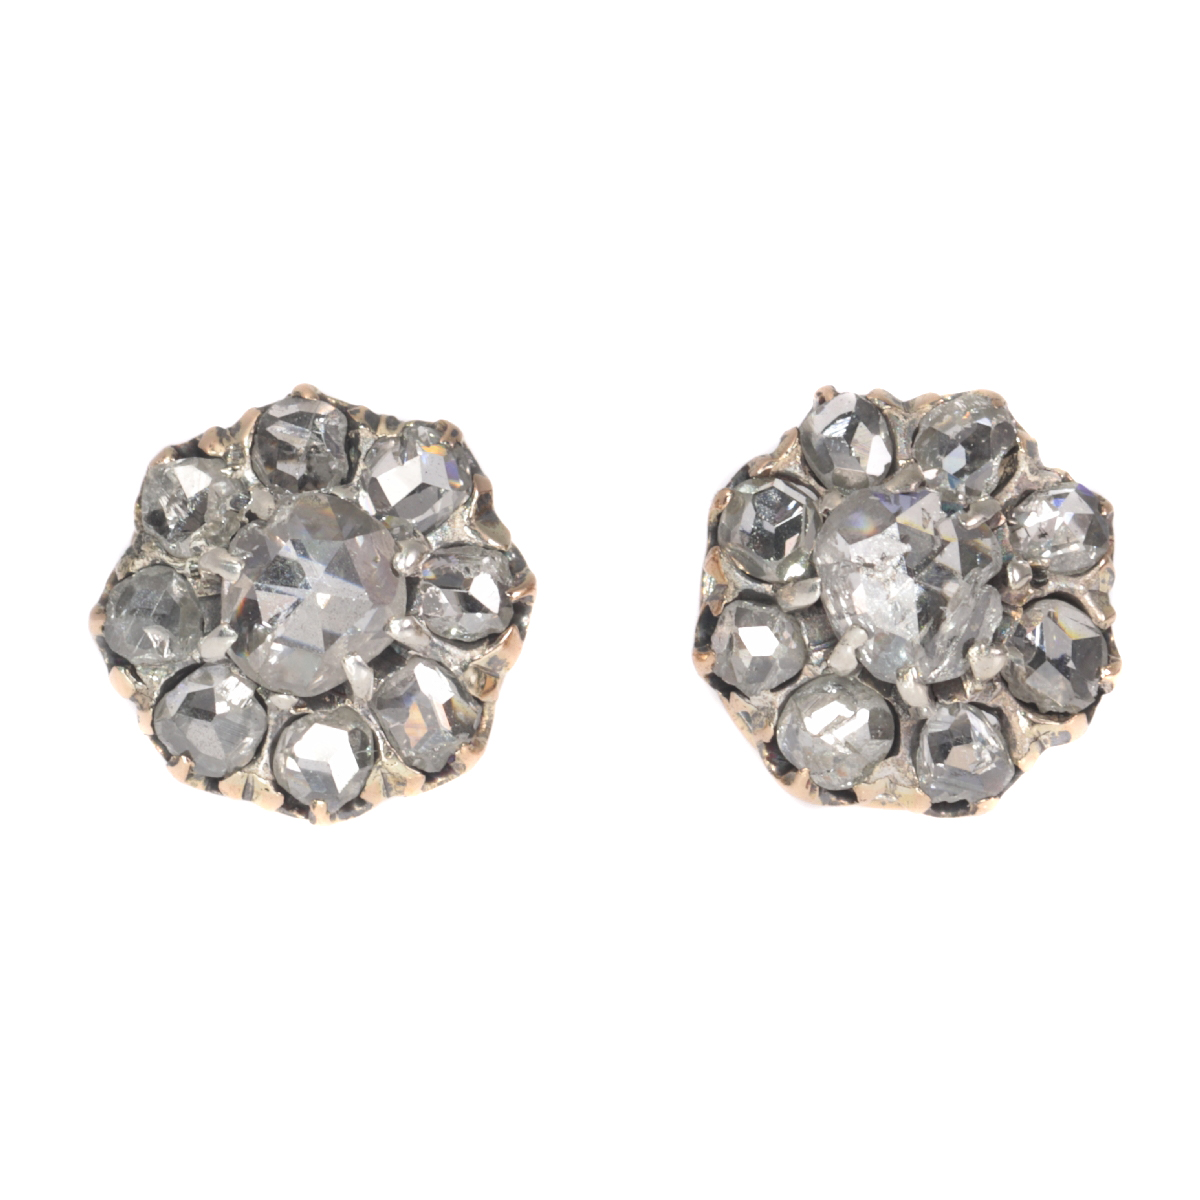 Antique Victorian earstuds with rose cut diamonds 18K gold